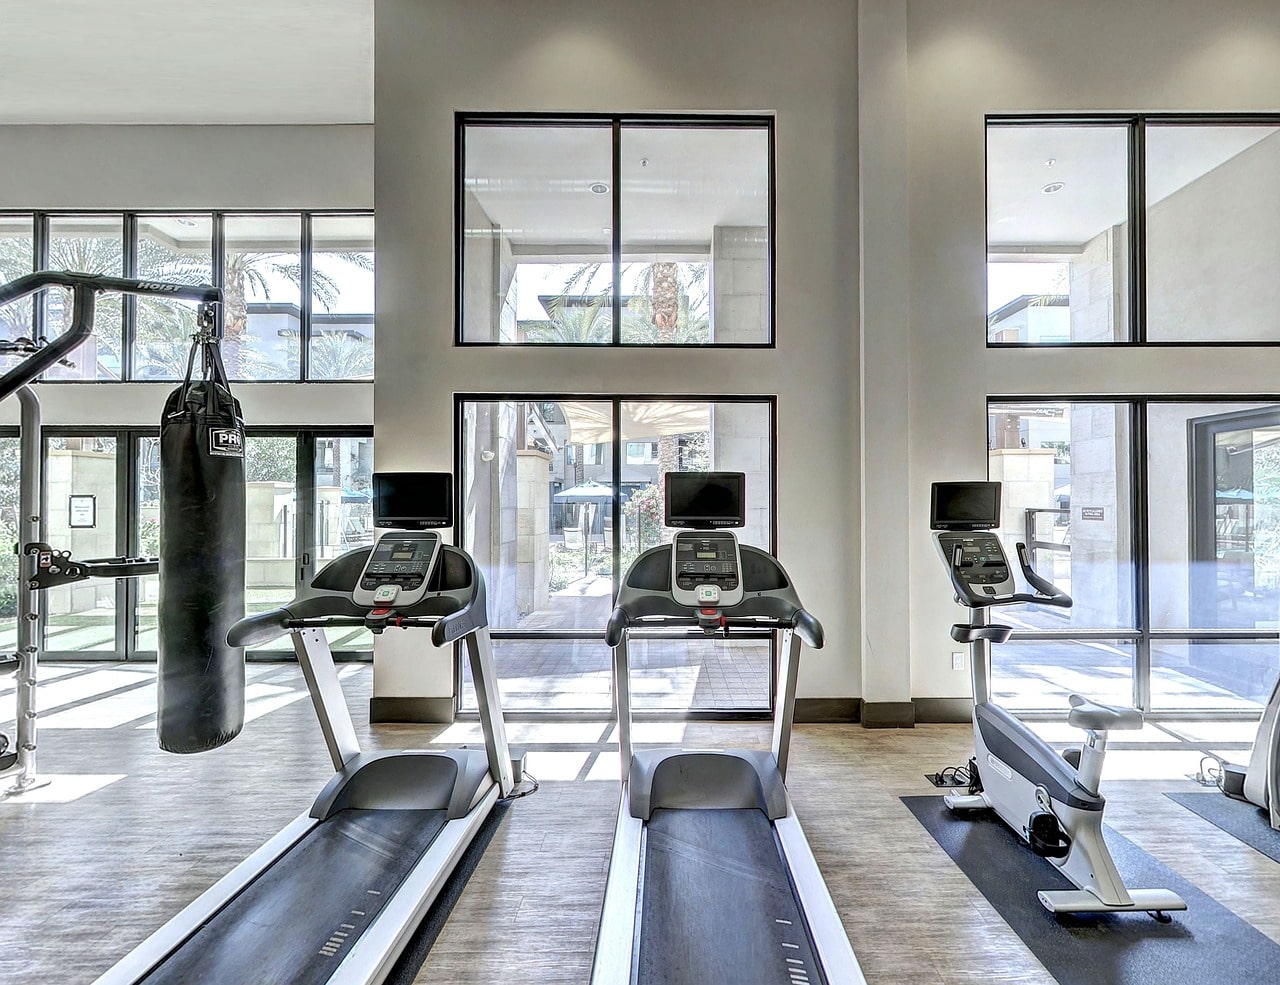 Top Alternatives to Treadmills for Home Workouts